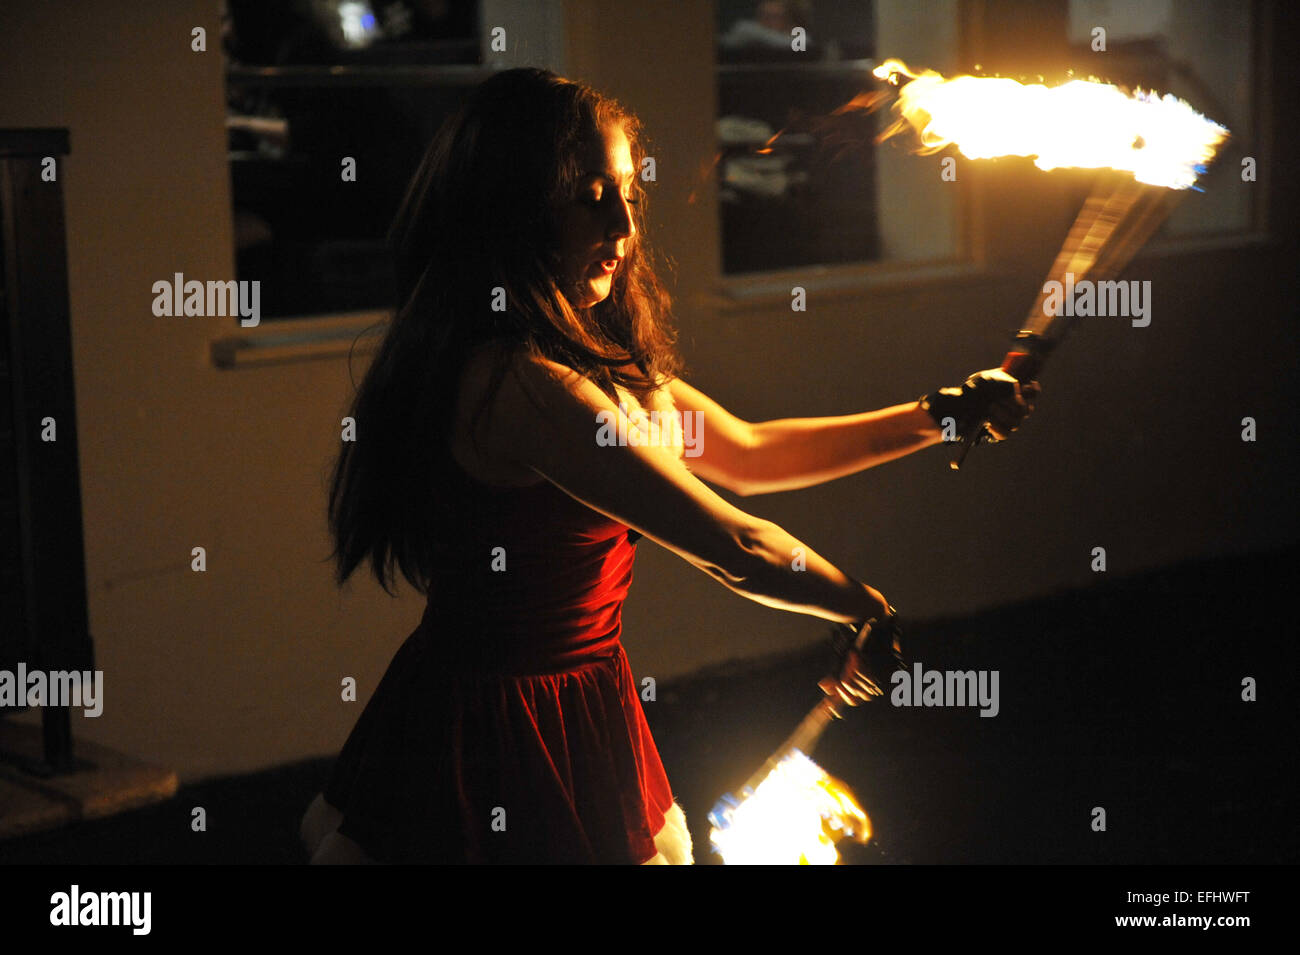 Fire eater entertainment at an opening party night. Stock Photo